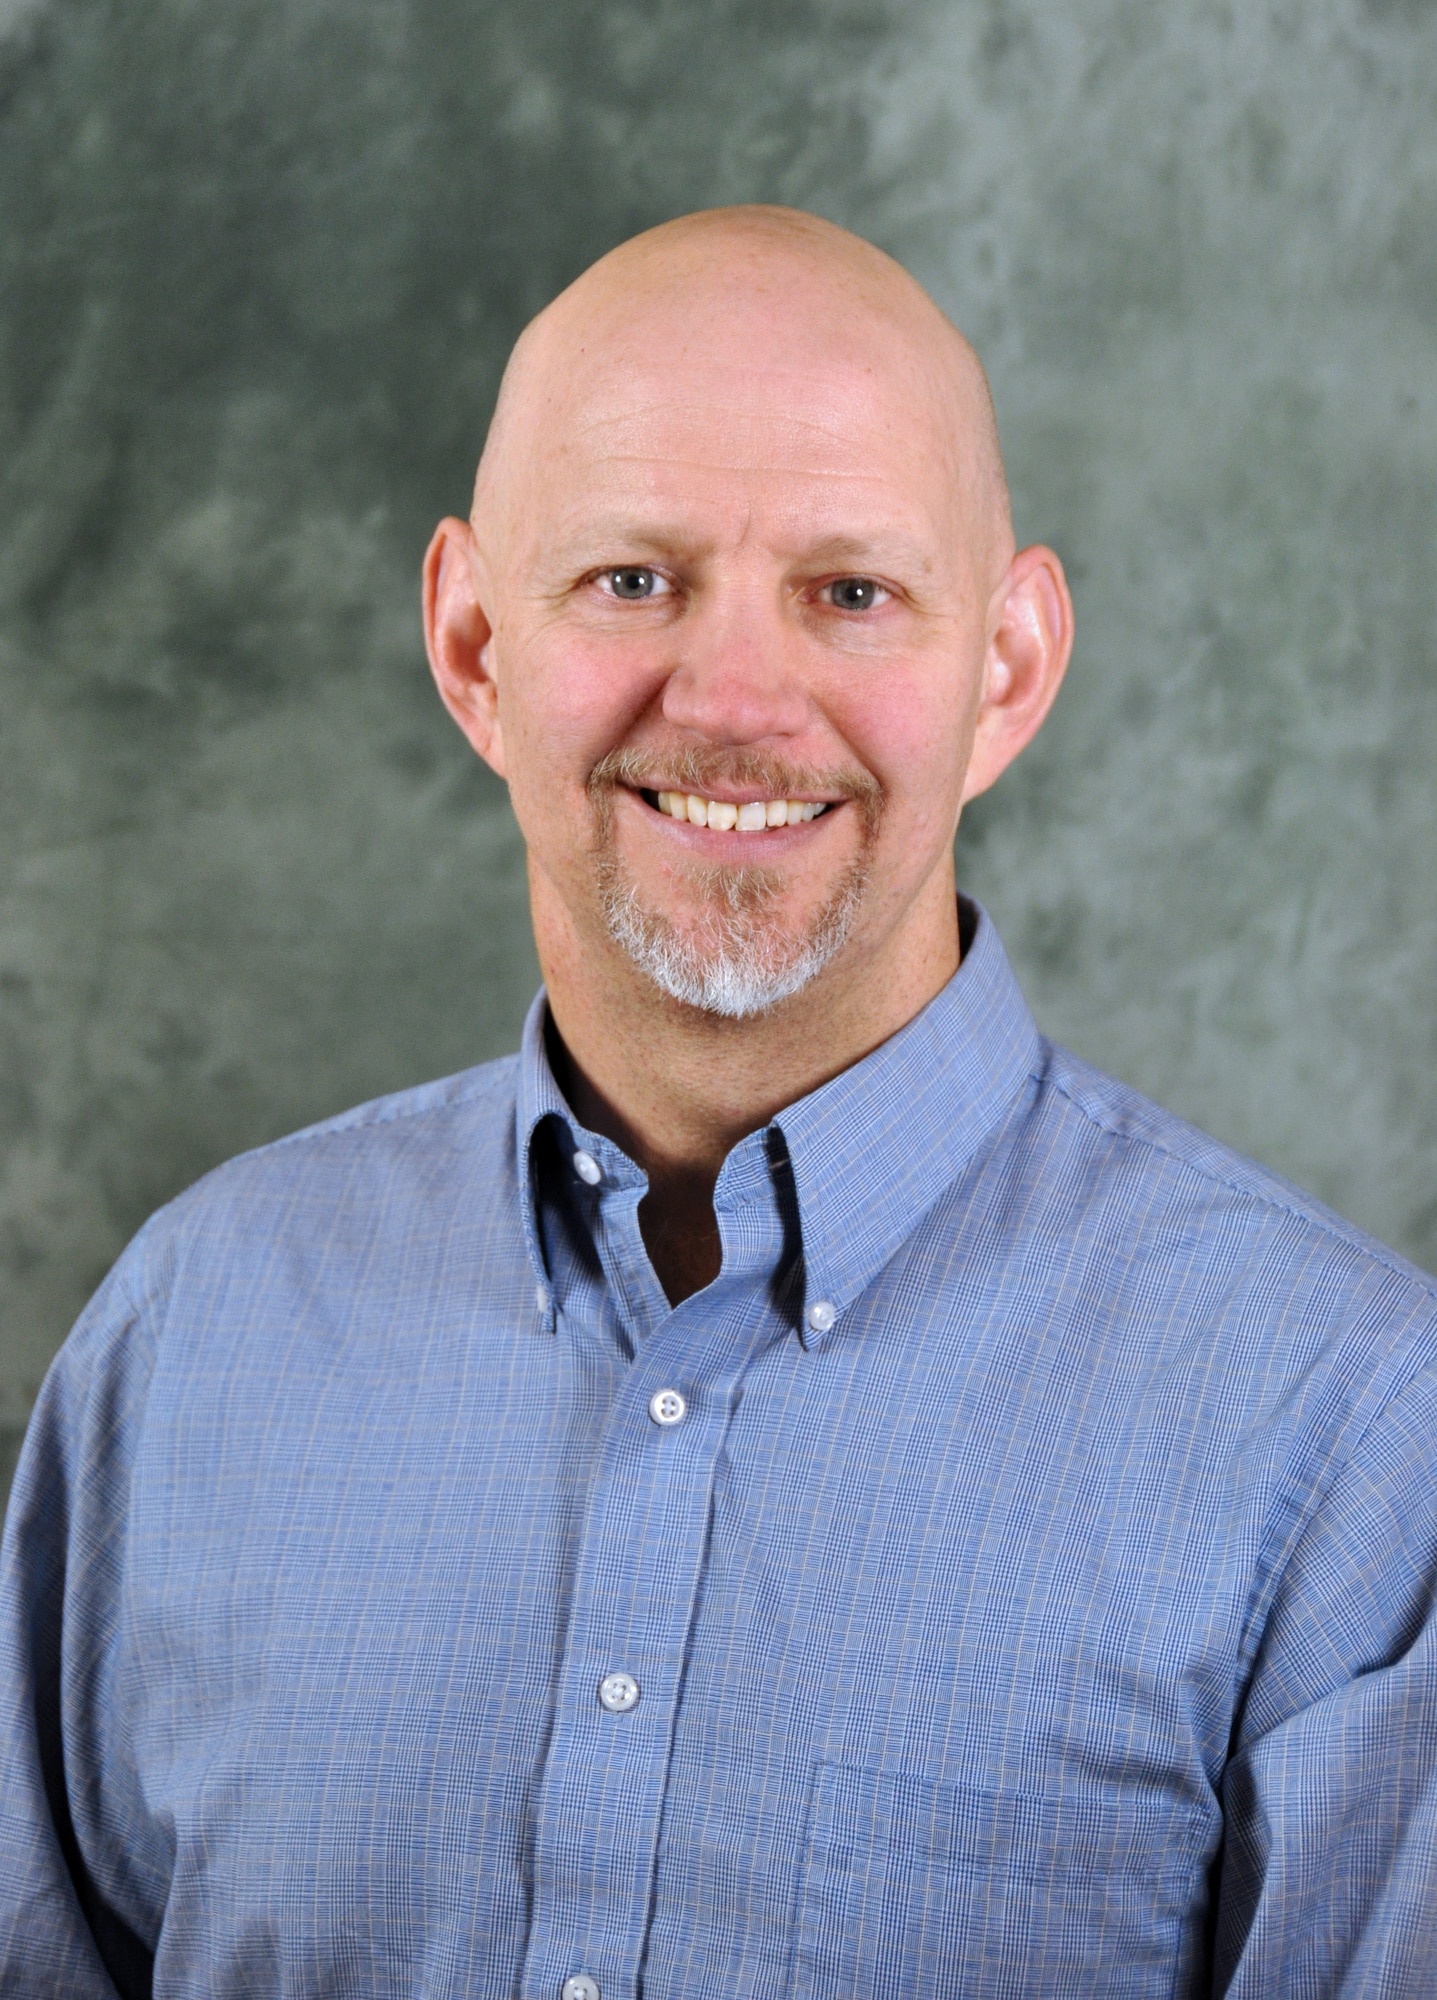 Dr. Daniel Miracle, a senior scientist in the Materials and Manufacturing Directorate, Air Force Research Laboratory, will receive The Minerals, Metals and Materials Society Fellow Award on March 14, 2018, in Phoenix, Arizona.